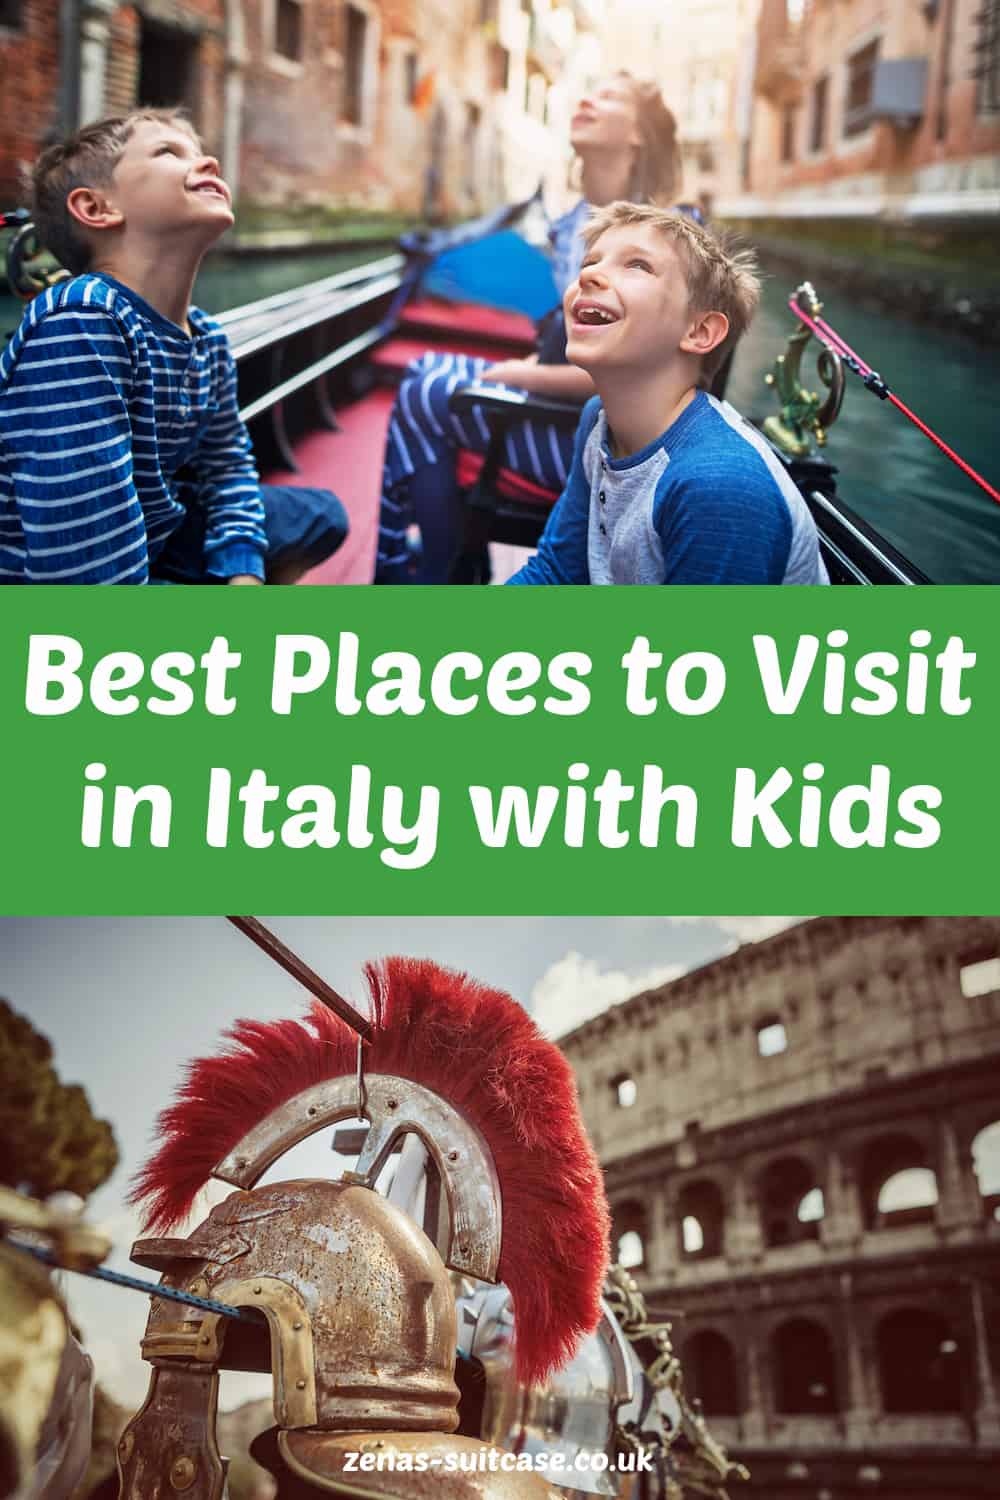 Best Places to Visit in Italy with Kids